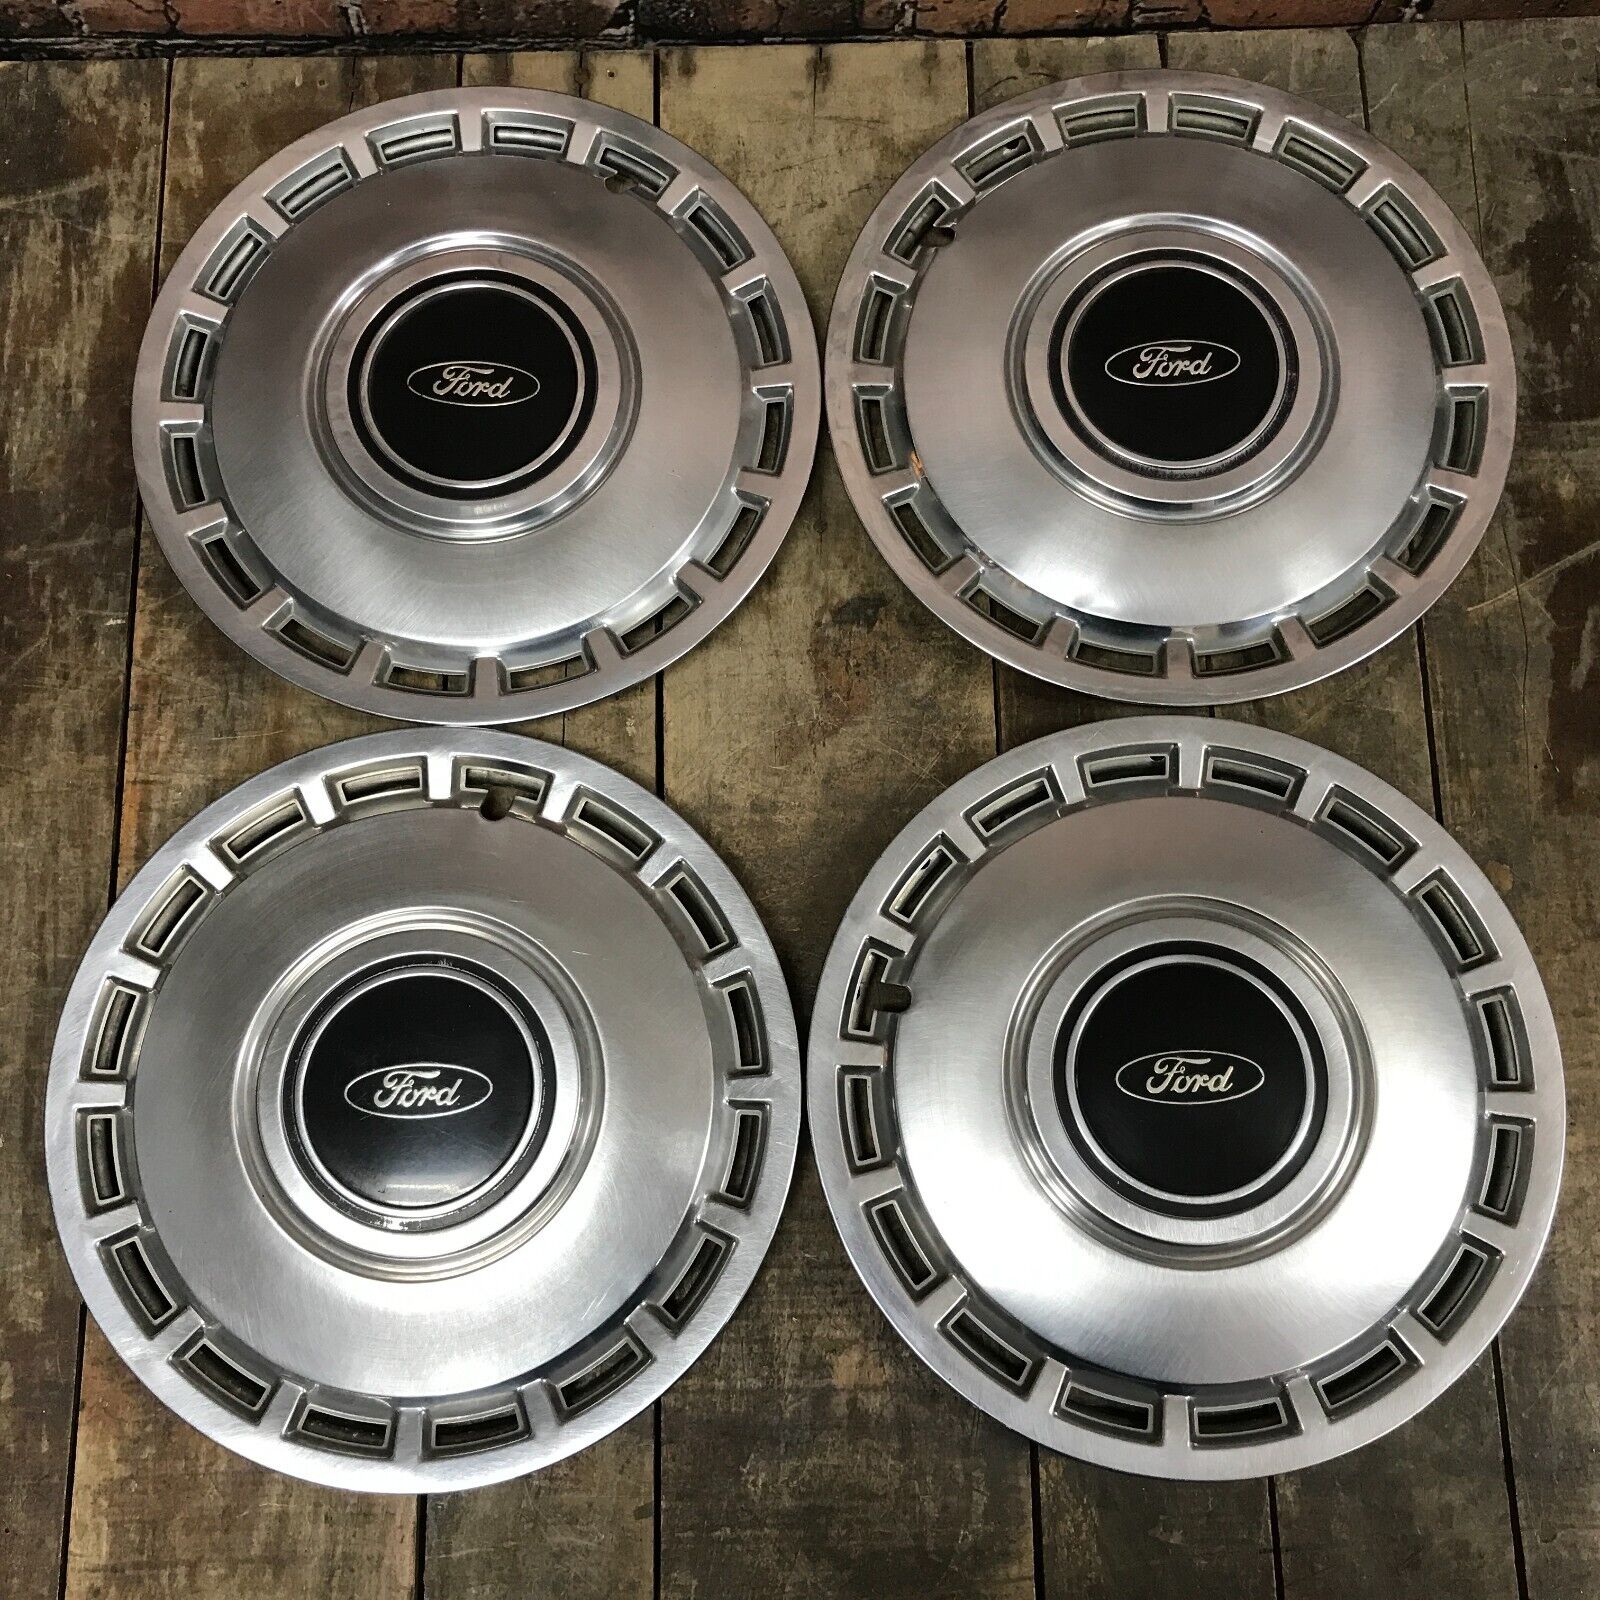 Factory 1984 1985 Ford Tempo 13 Inch Metal Hubcaps Wheel Covers Set of 4